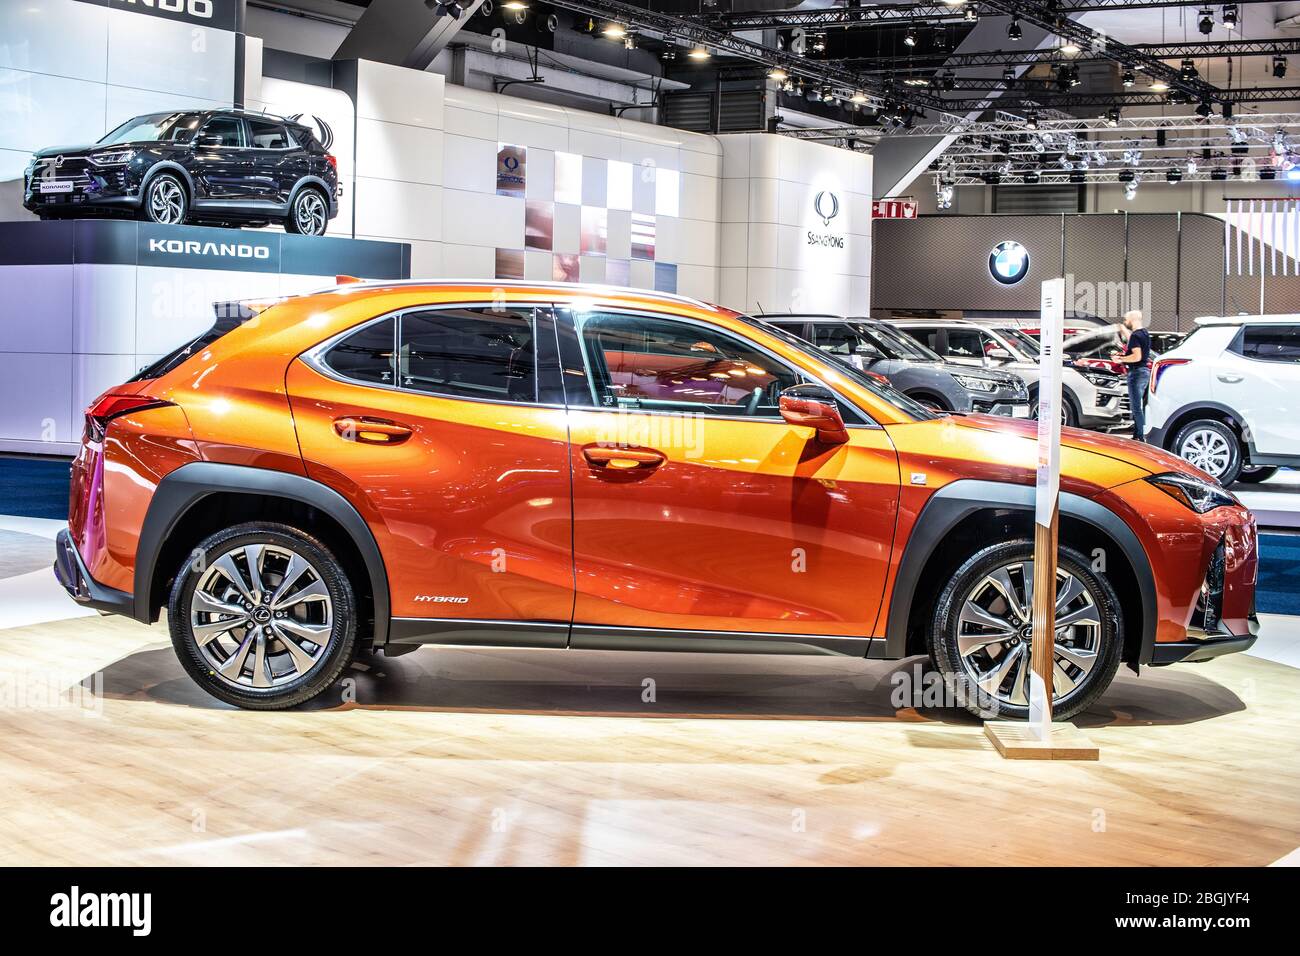 Brussels, Belgium, Jan 09, 2020: new Lexus UX 250h hybrid compact luxury Crossover at Brussels Motor Show, SUV produced by Japanese car maker Lexus Stock Photo